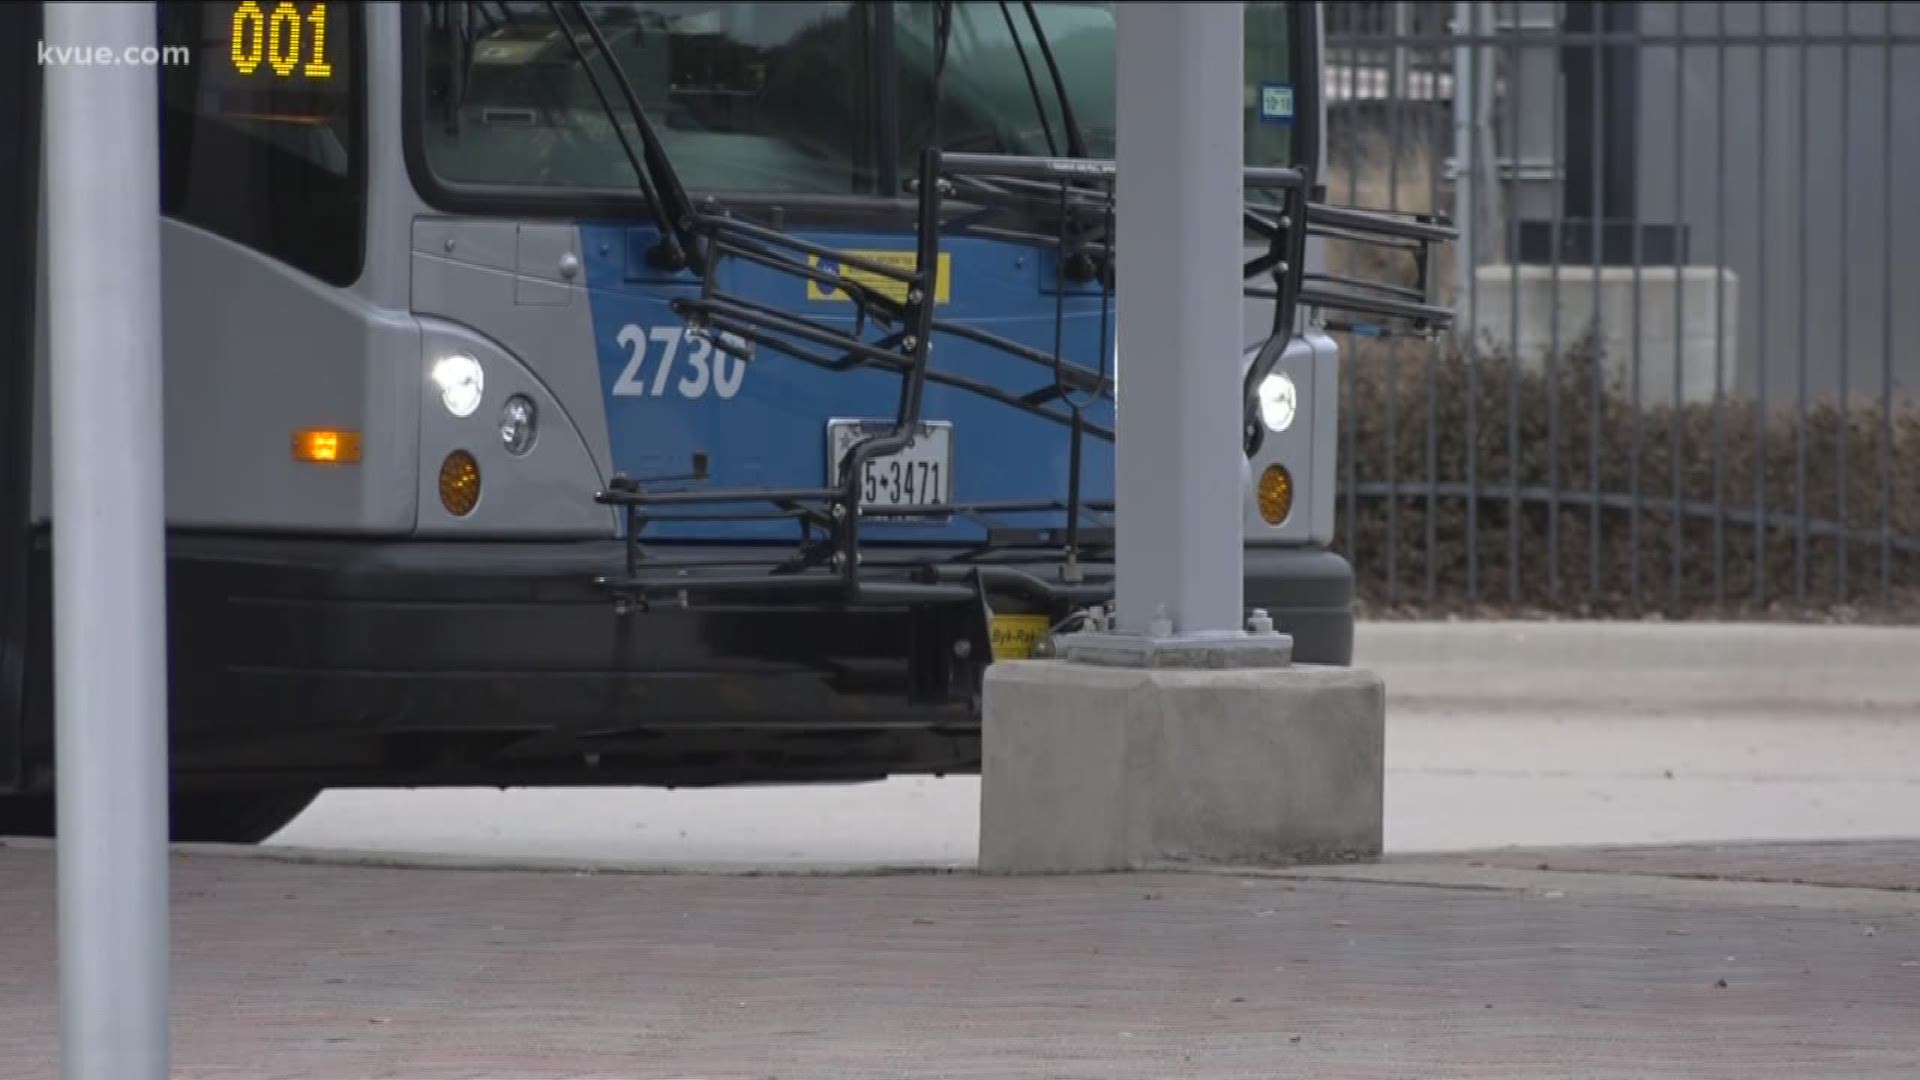 Officials with cap metro decided to make the "Kids Ride Free" pilot program permanent.